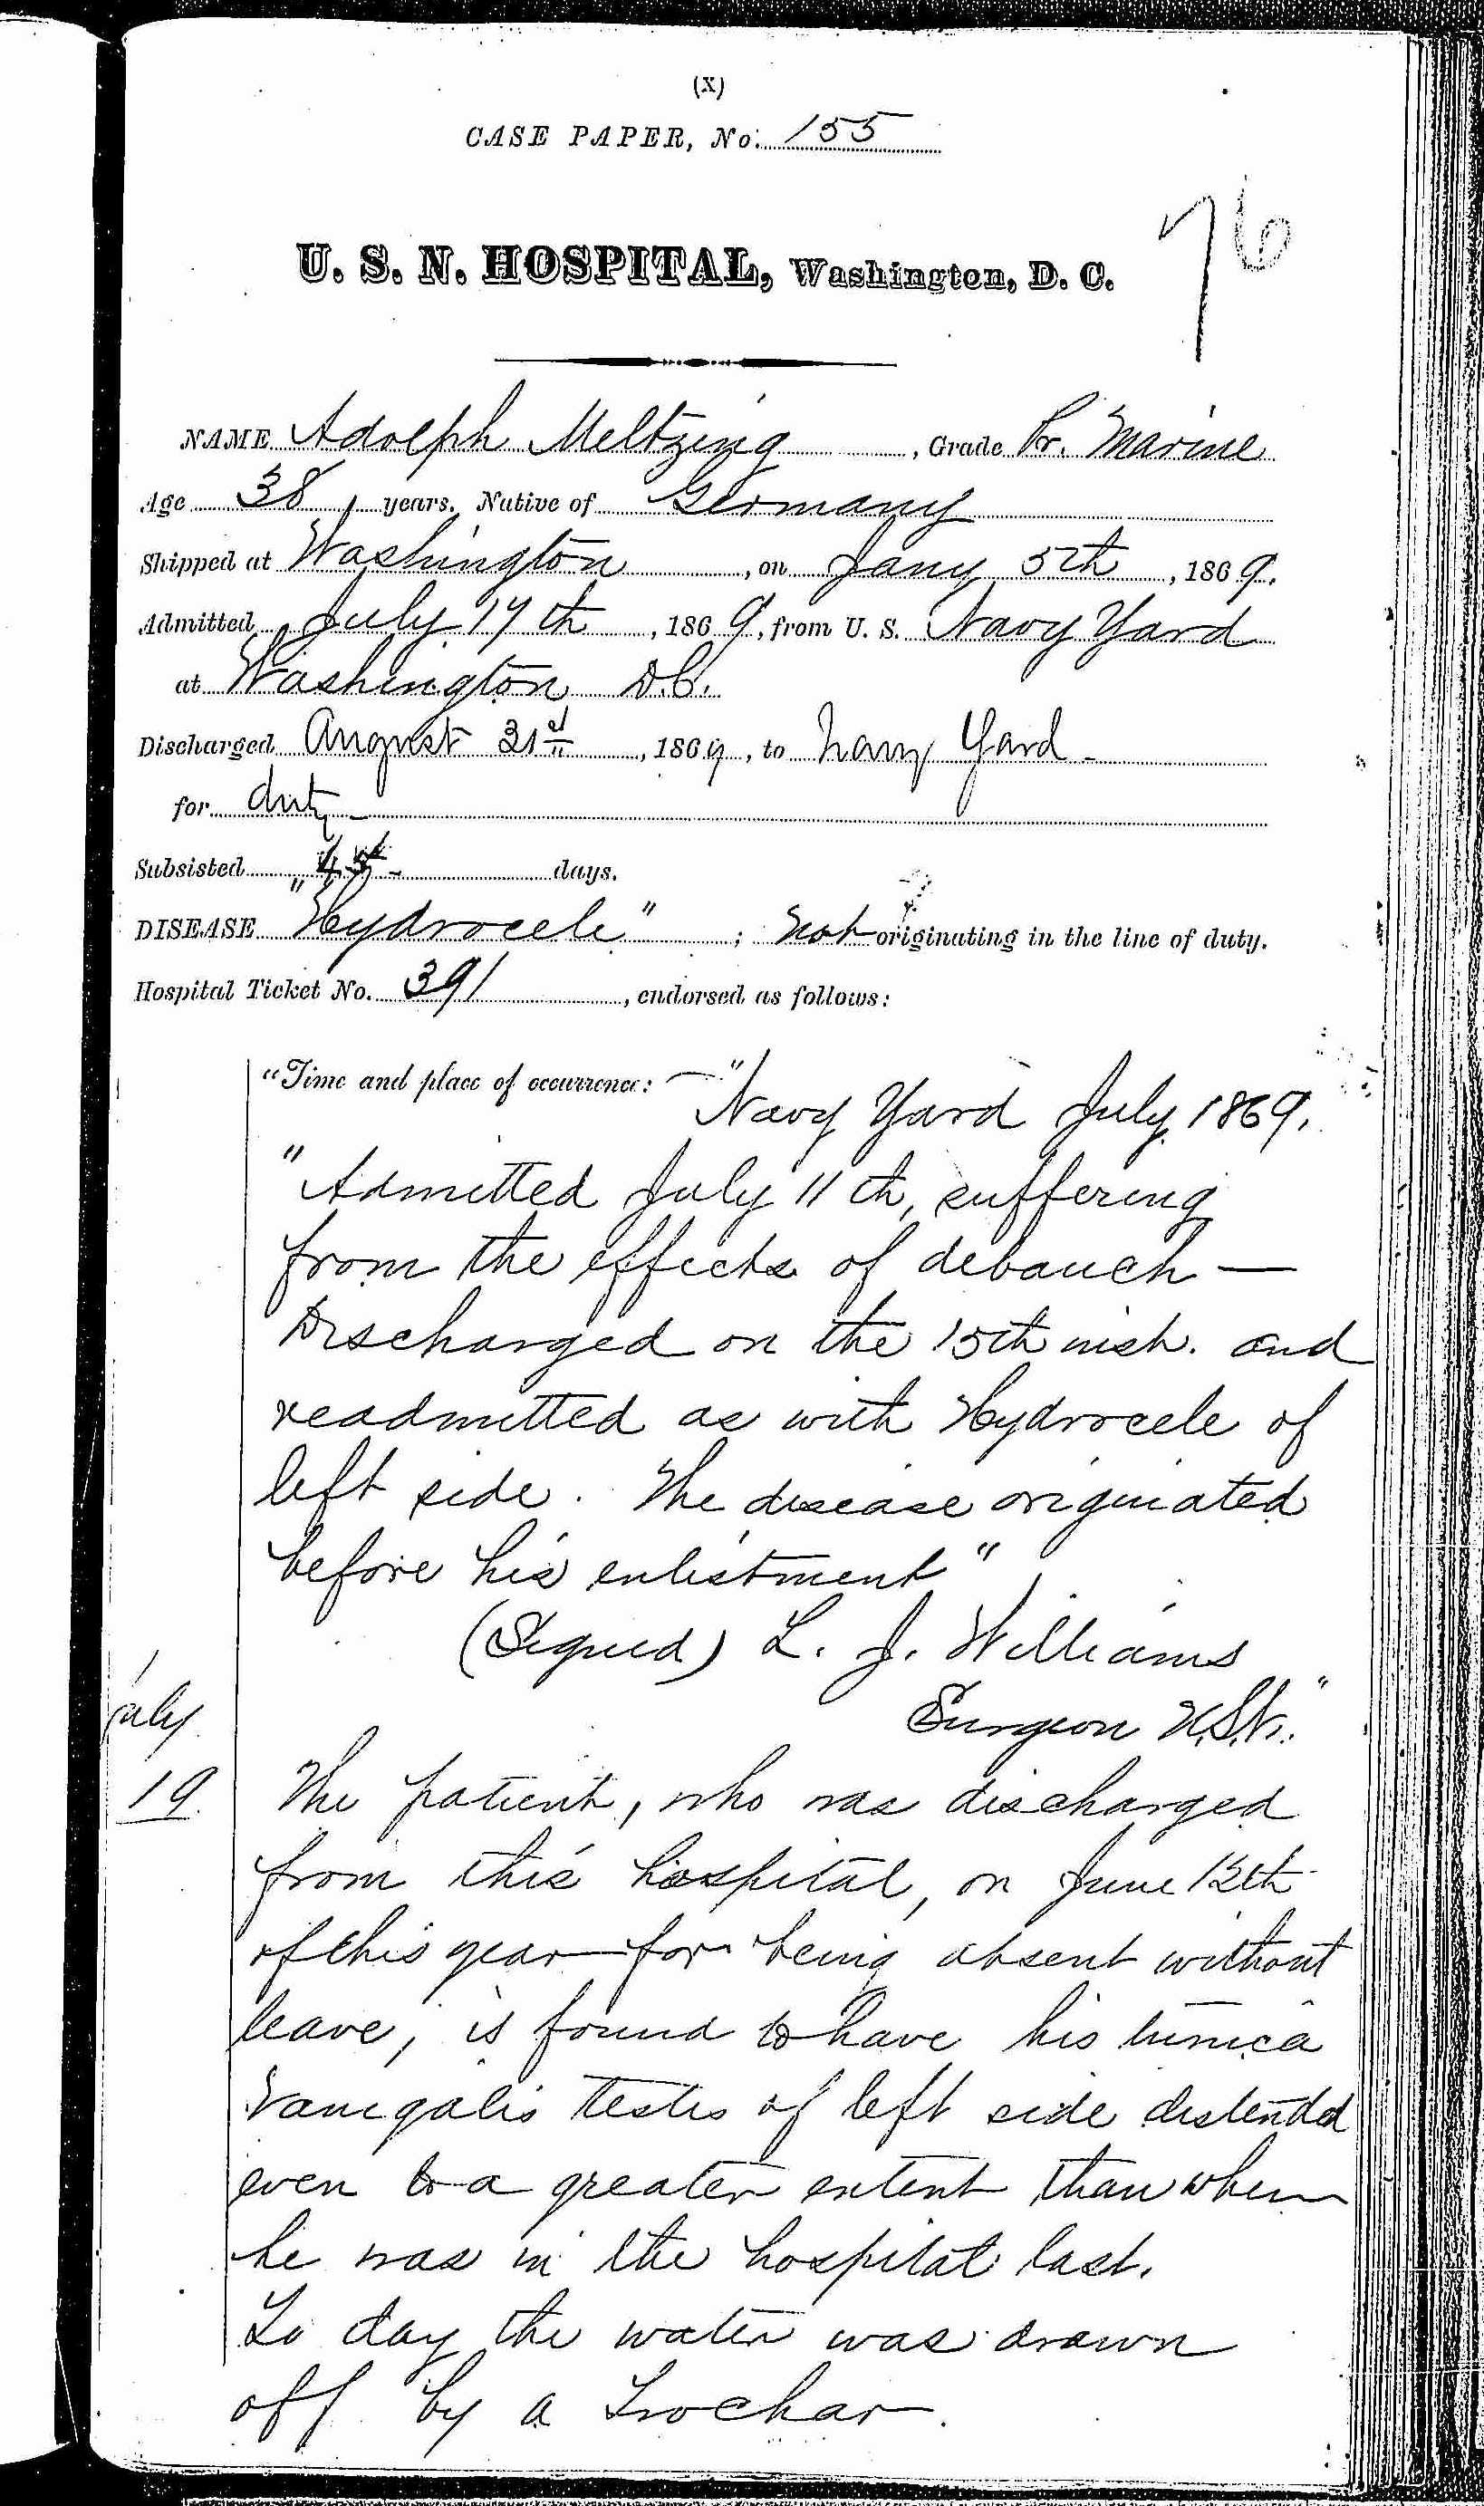 Entry for Adolph Meltzing (second admission page 1 of 4) in the log Hospital Tickets and Case Papers - Naval Hospital - Washington, D.C. - 1868-69